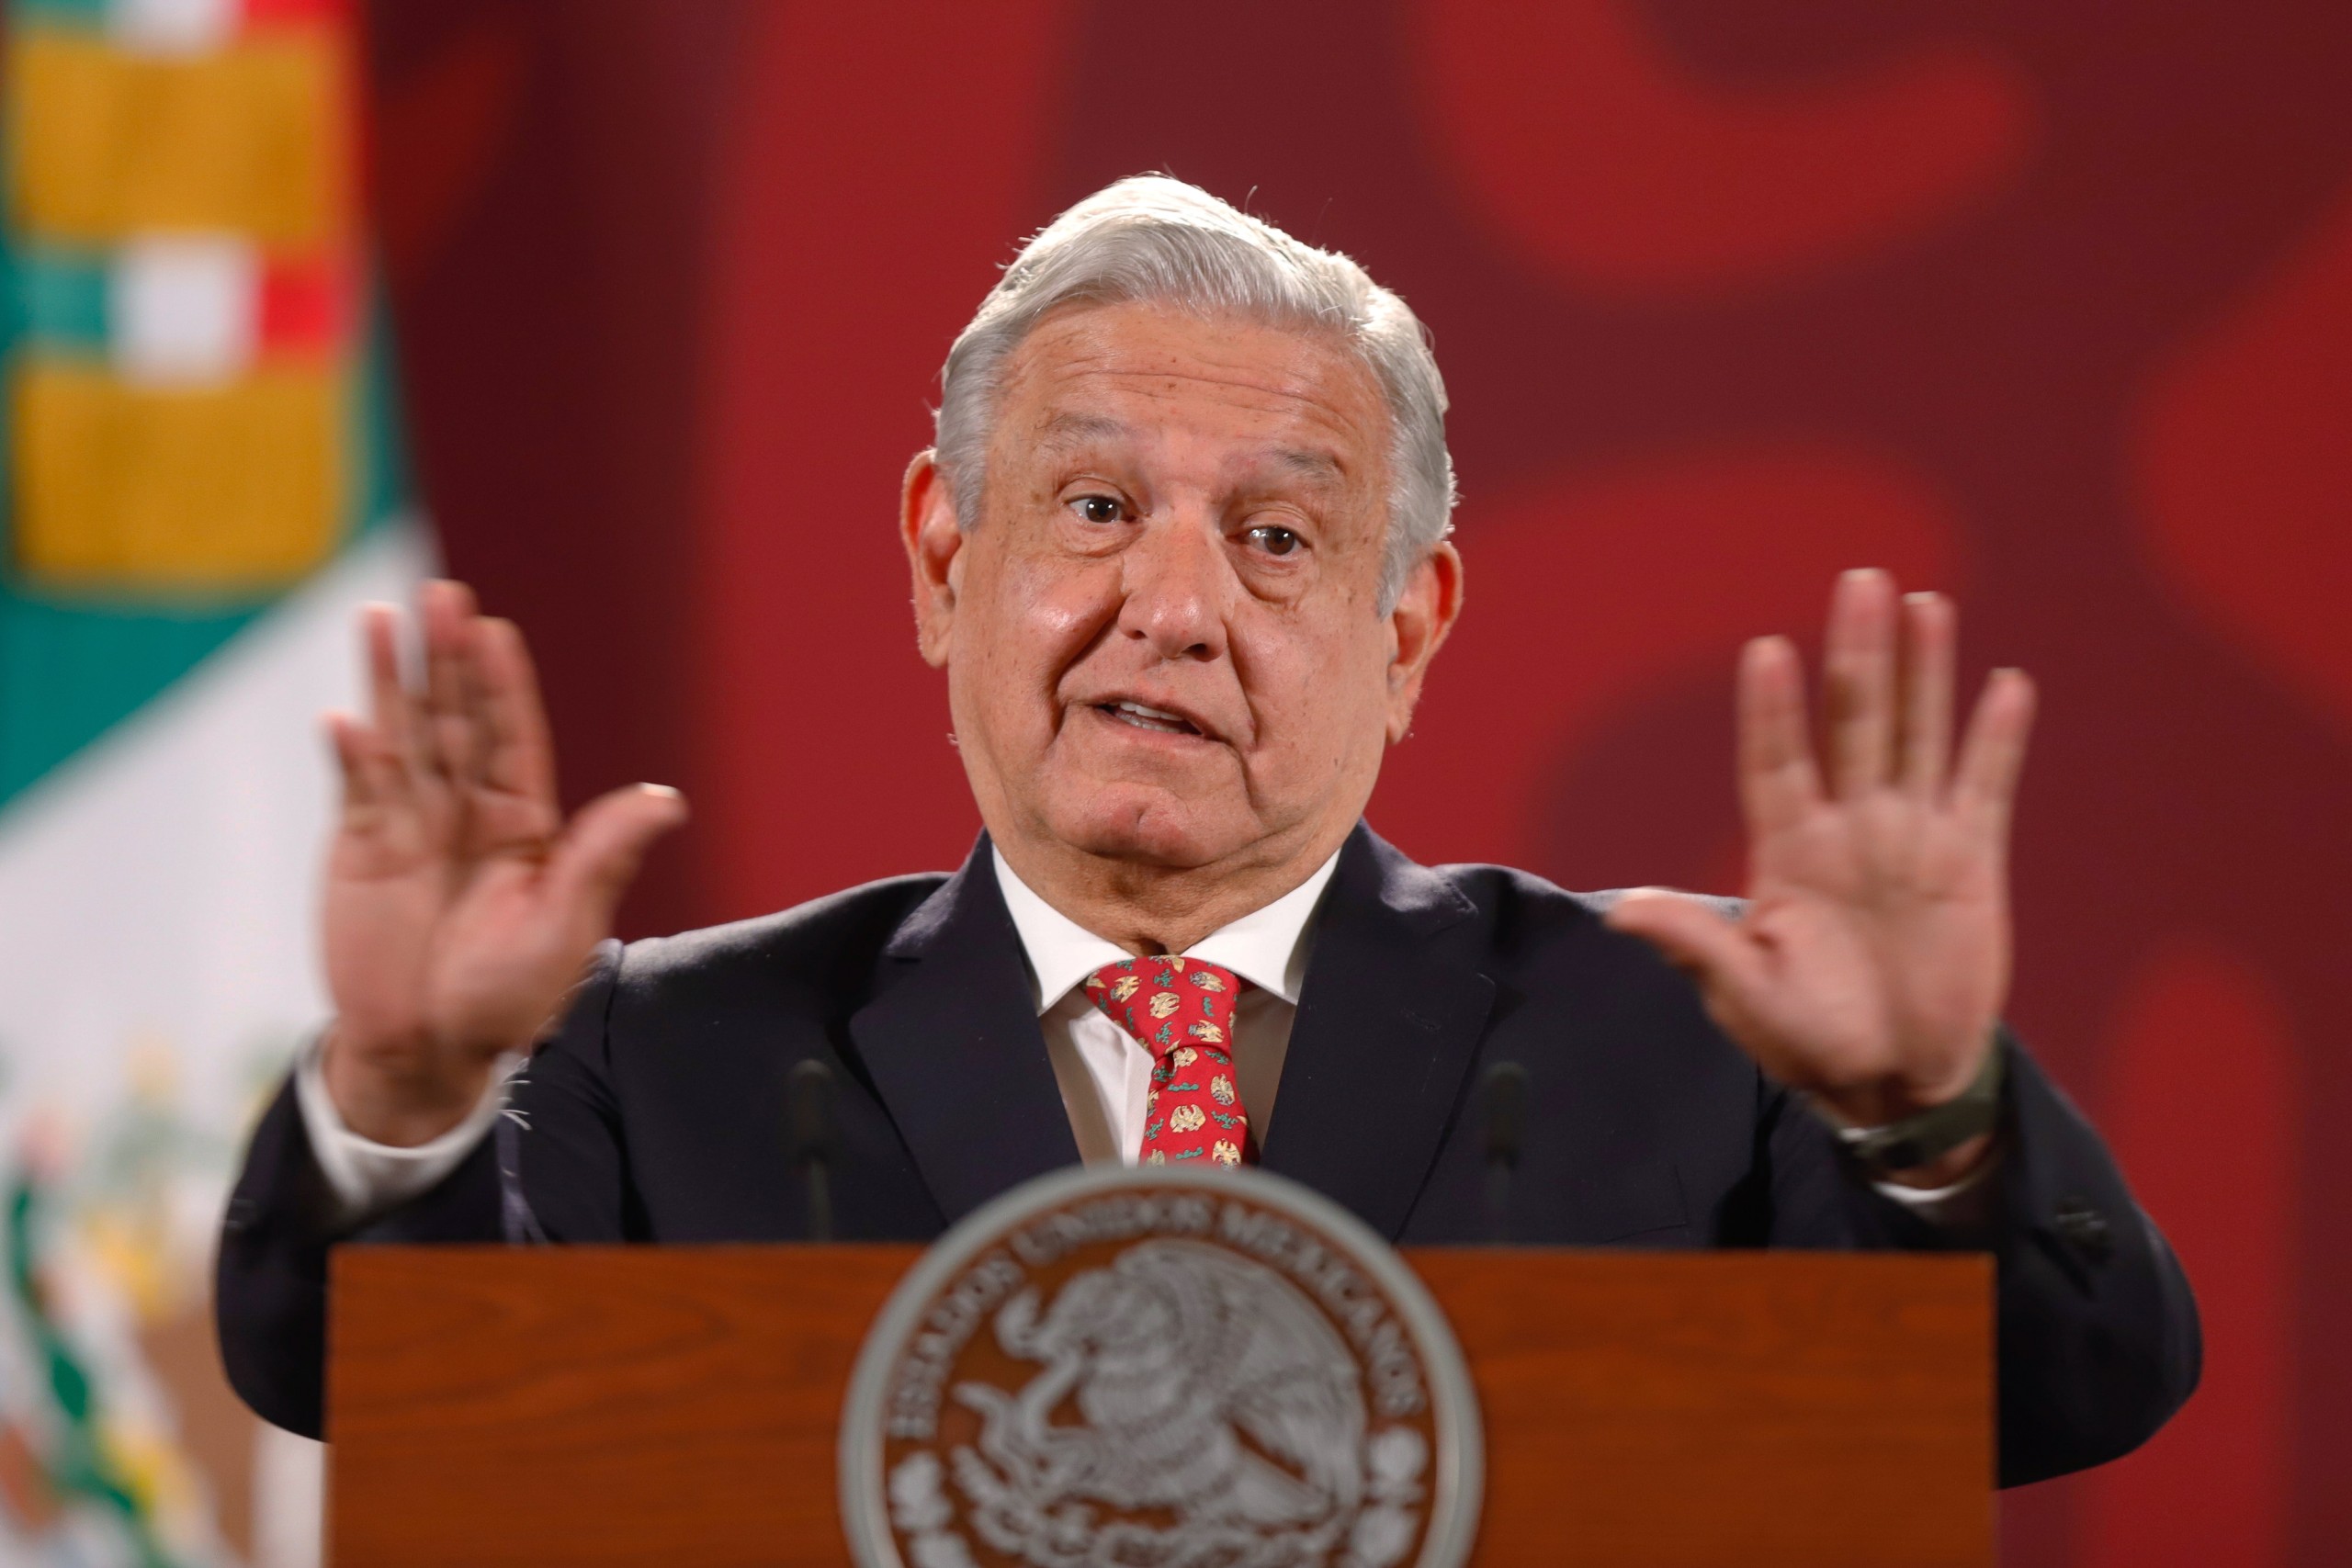 epa09999052 Mexican President Andres Manuel Lopez Obrador speaks during his daily press conference at the National Palace in Mexico City, Mexico, 06 June 2022. Lopez Obrador has confirmed he will not attend the Summit of the Americas in Los Angeles, USA, and that Foreign Minister Ebrard will head Mexico's delegation for the summit.  EPA/ISAAC ESQUIVEL